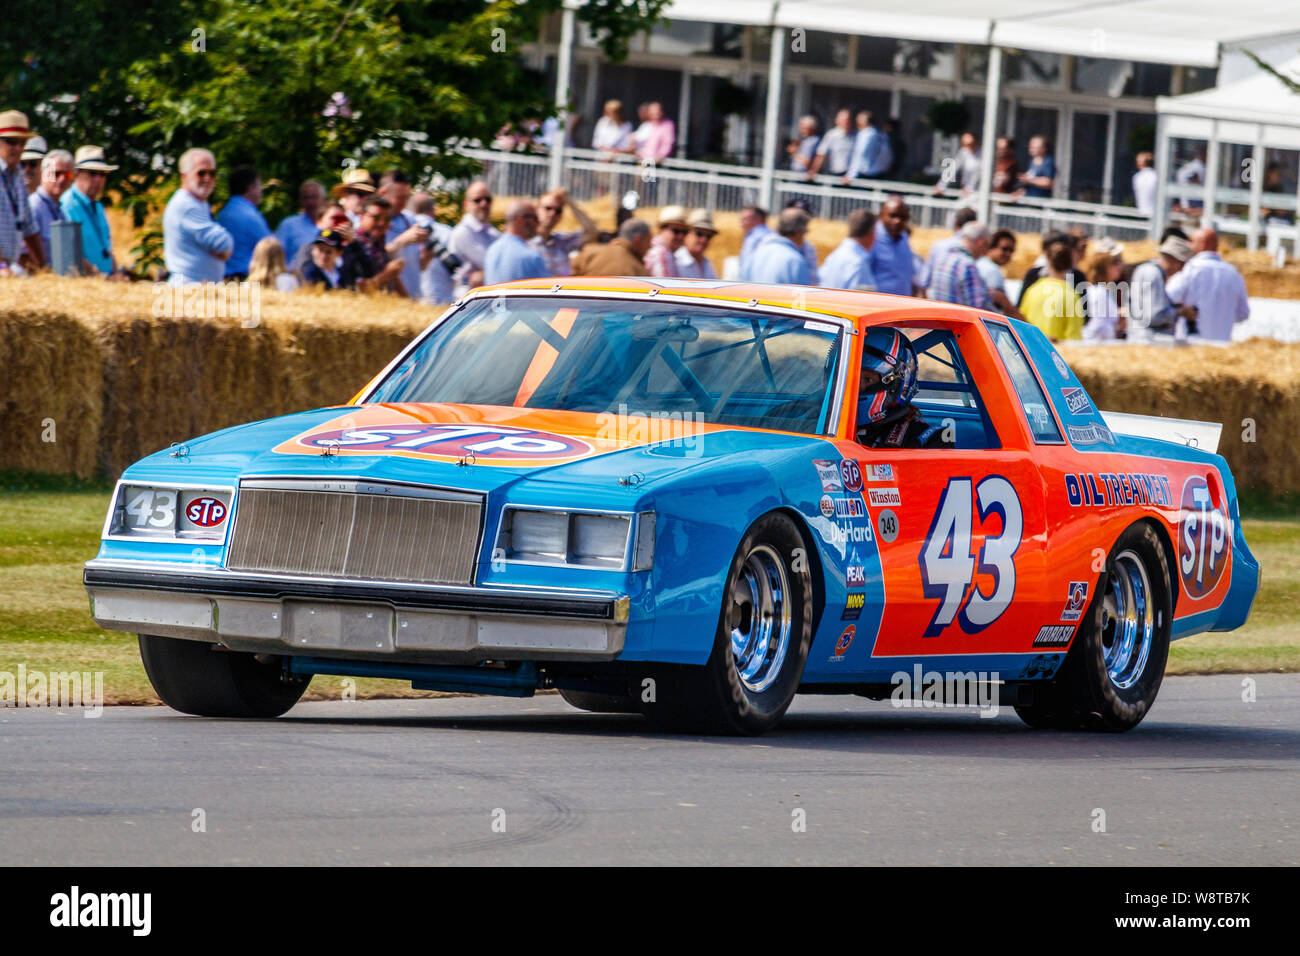 Richard Petty's historic 1981 Buick Regal 5.7 litre V8 NASCAR racer with driver Thaddeus Moffitt at the 2019 Goodwood Festival of Speed, Sussex, UK Stock Photo